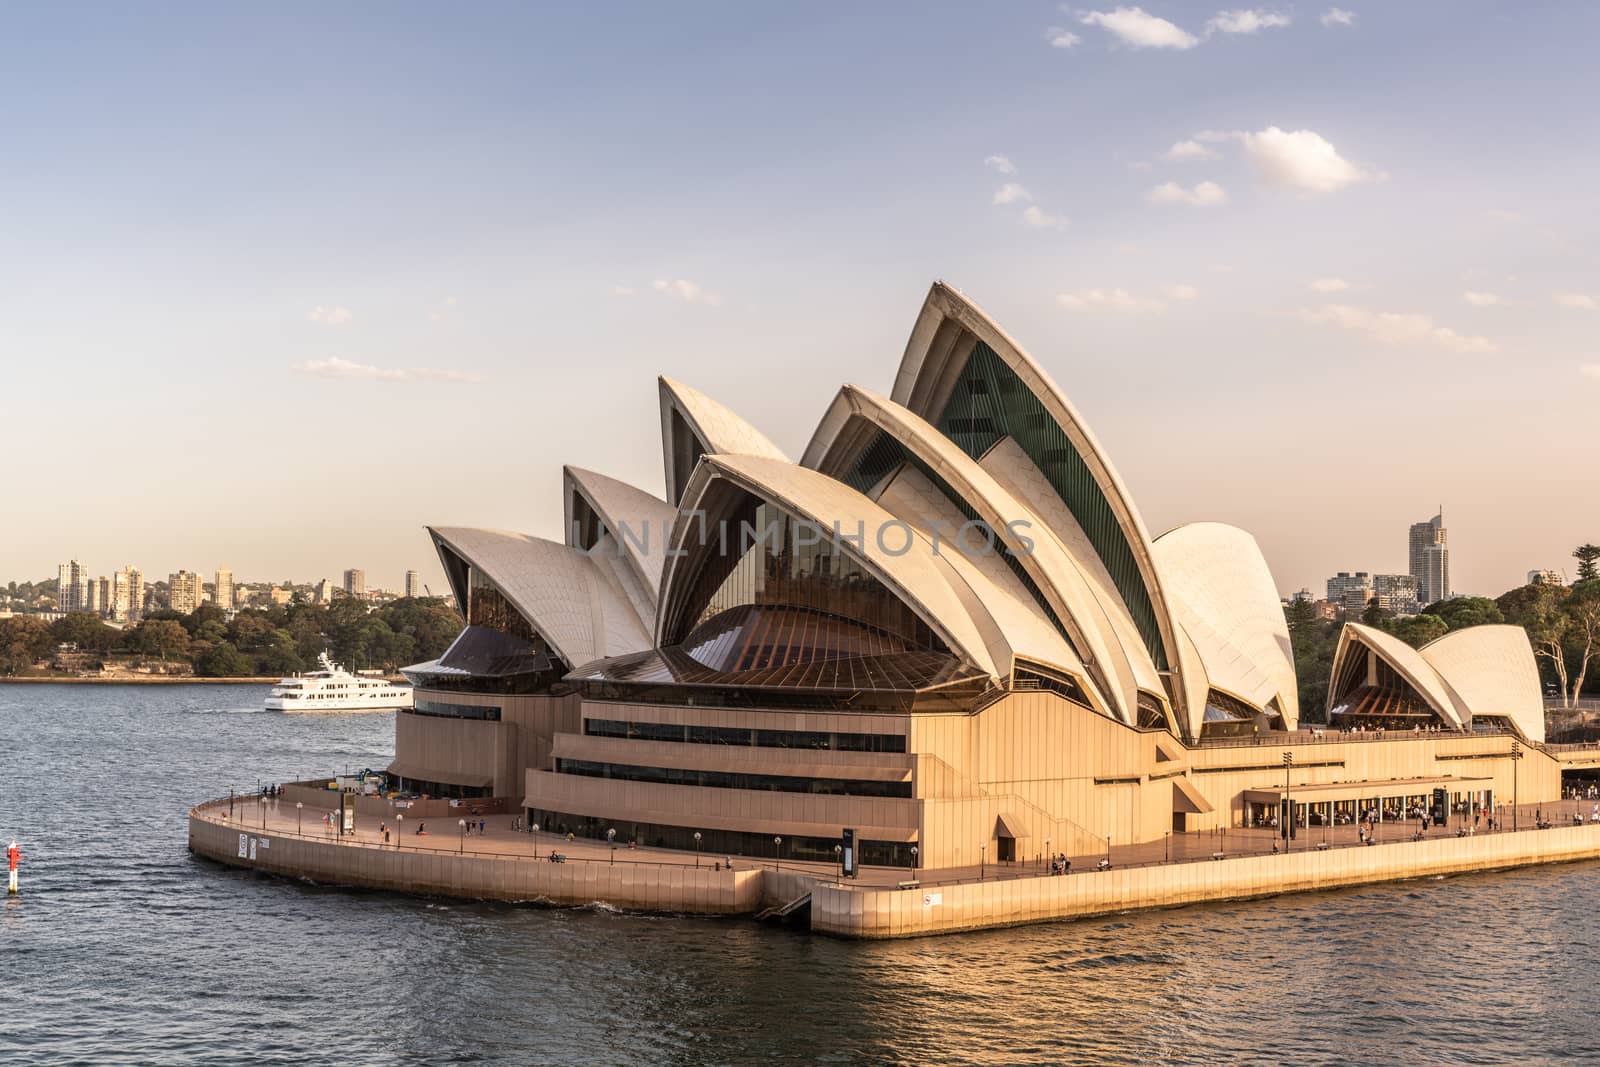 Sydney, Australia - February 12, 2019: Northwest corner view of the Opera House with ferries in front. Blue sky and water. Horizon is north shore of bay.